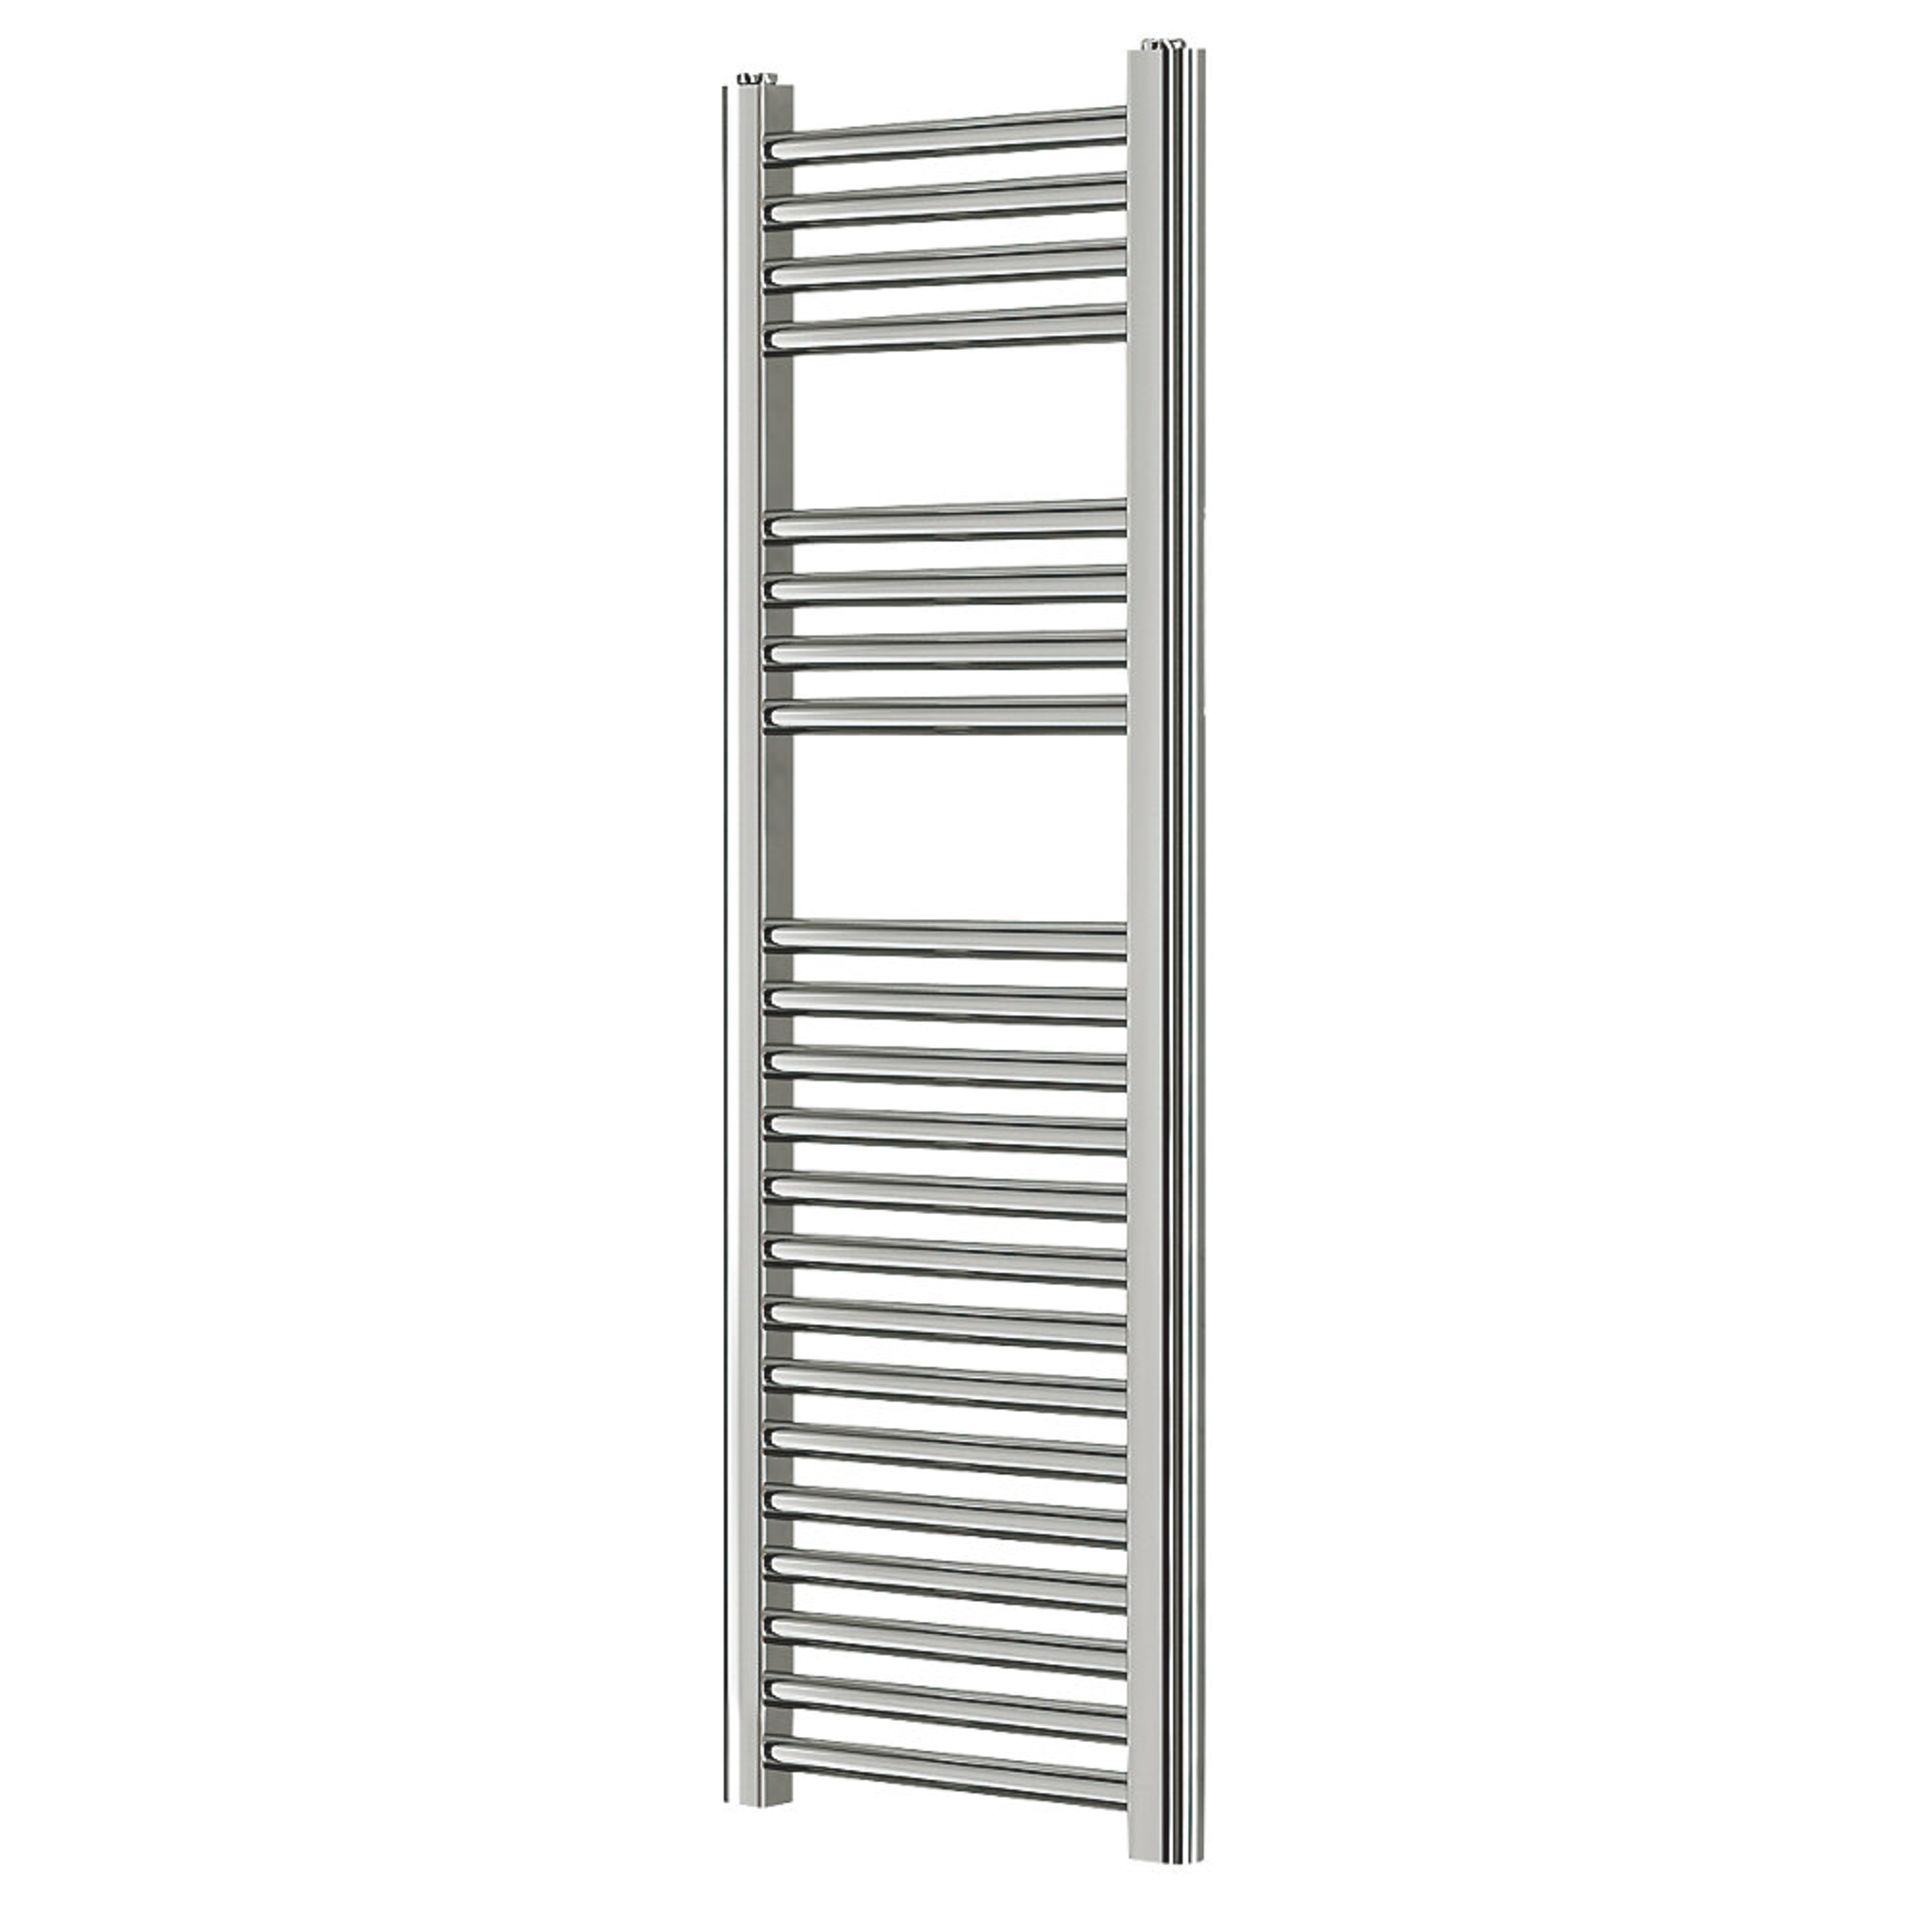 New (G52) 1100x300mm Chrome Flat Ladder Towel Radiator. Made From Chrome Plated Low Carbon Ste... - Image 2 of 2